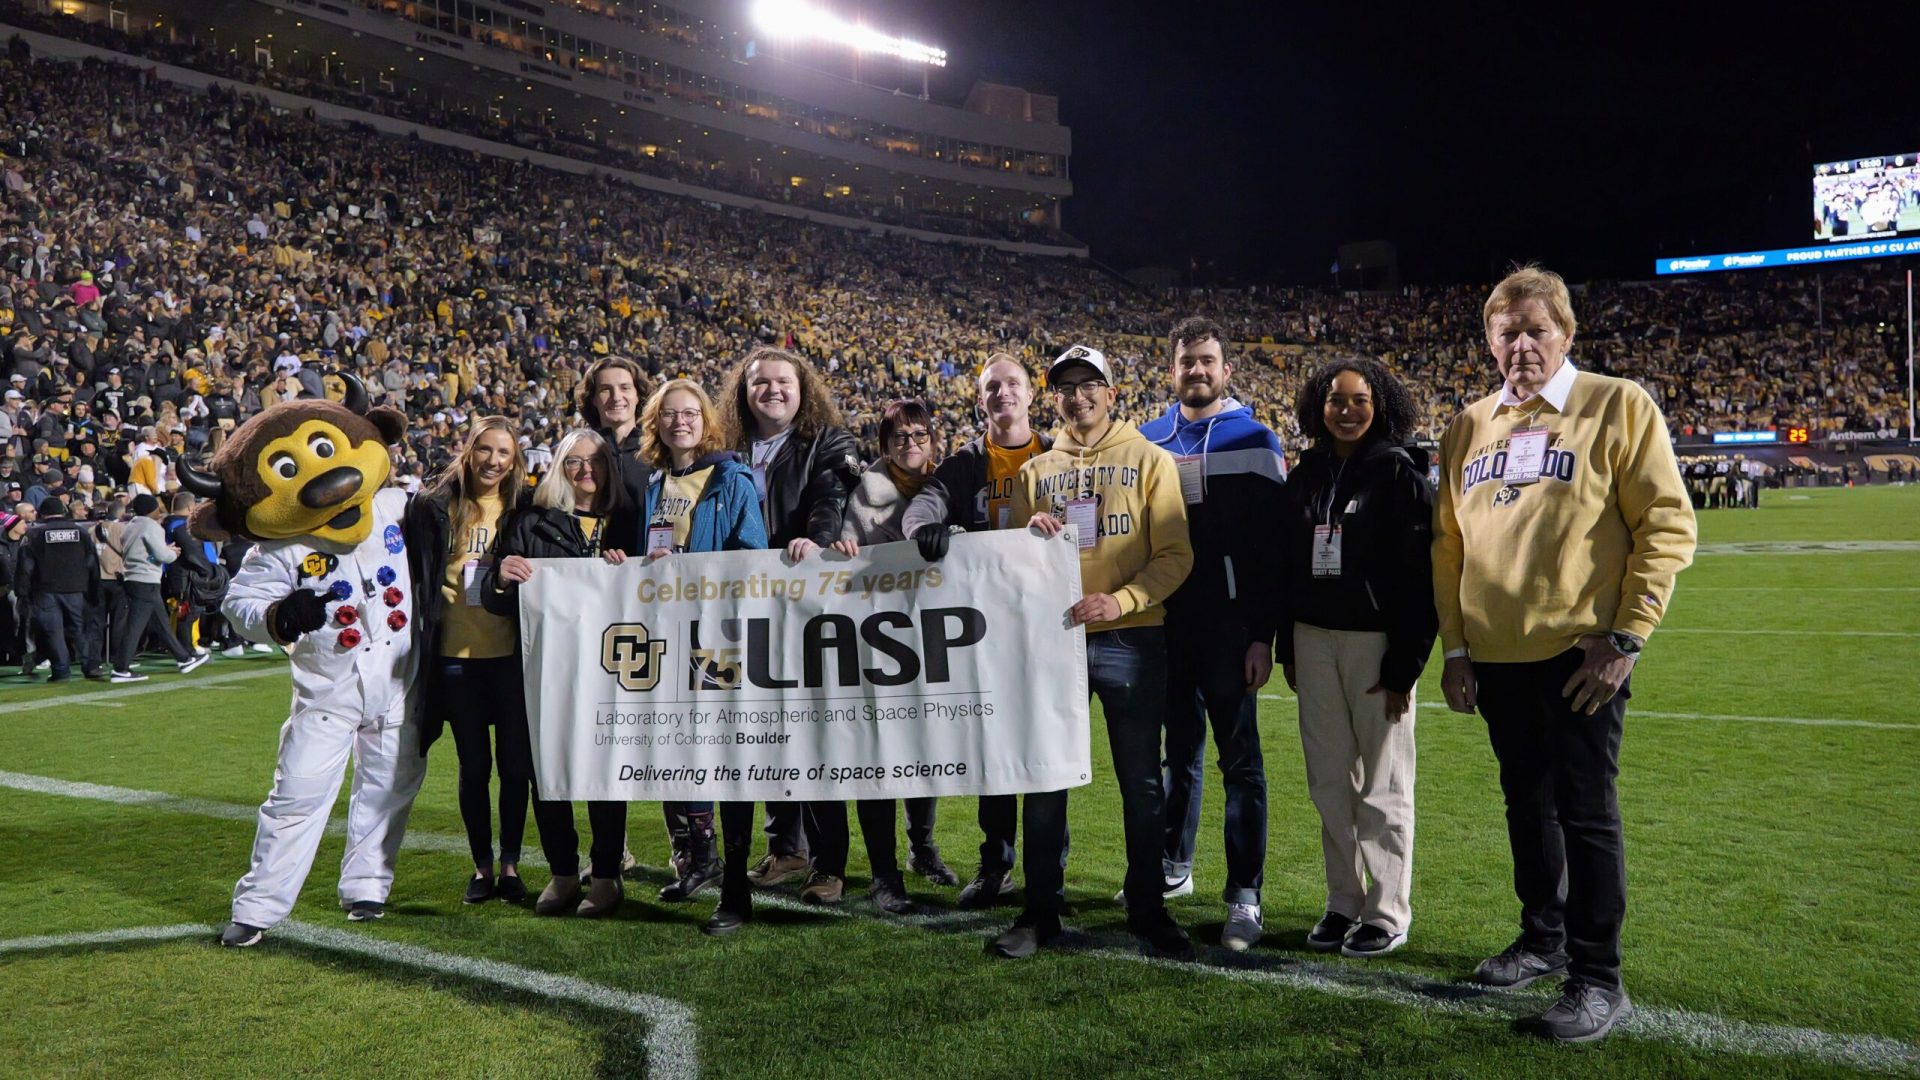 At the Oct. 13 space-themed football game, LASP was honored with an on-field recognition featured 10 CU Boulder graduate and undergraduate students who work at LASP, as well as LASP Director Dan Baker, and LASP Deputy Director Pam Millar. As the group carried LASP’s banner onto the field, the announcer noted that LASP, which was founded in 1948, a decade before NASA, is CU Boulder’s largest research institute and has sent instruments to study every planet in our solar system and beyond. Credit: CU Boulder